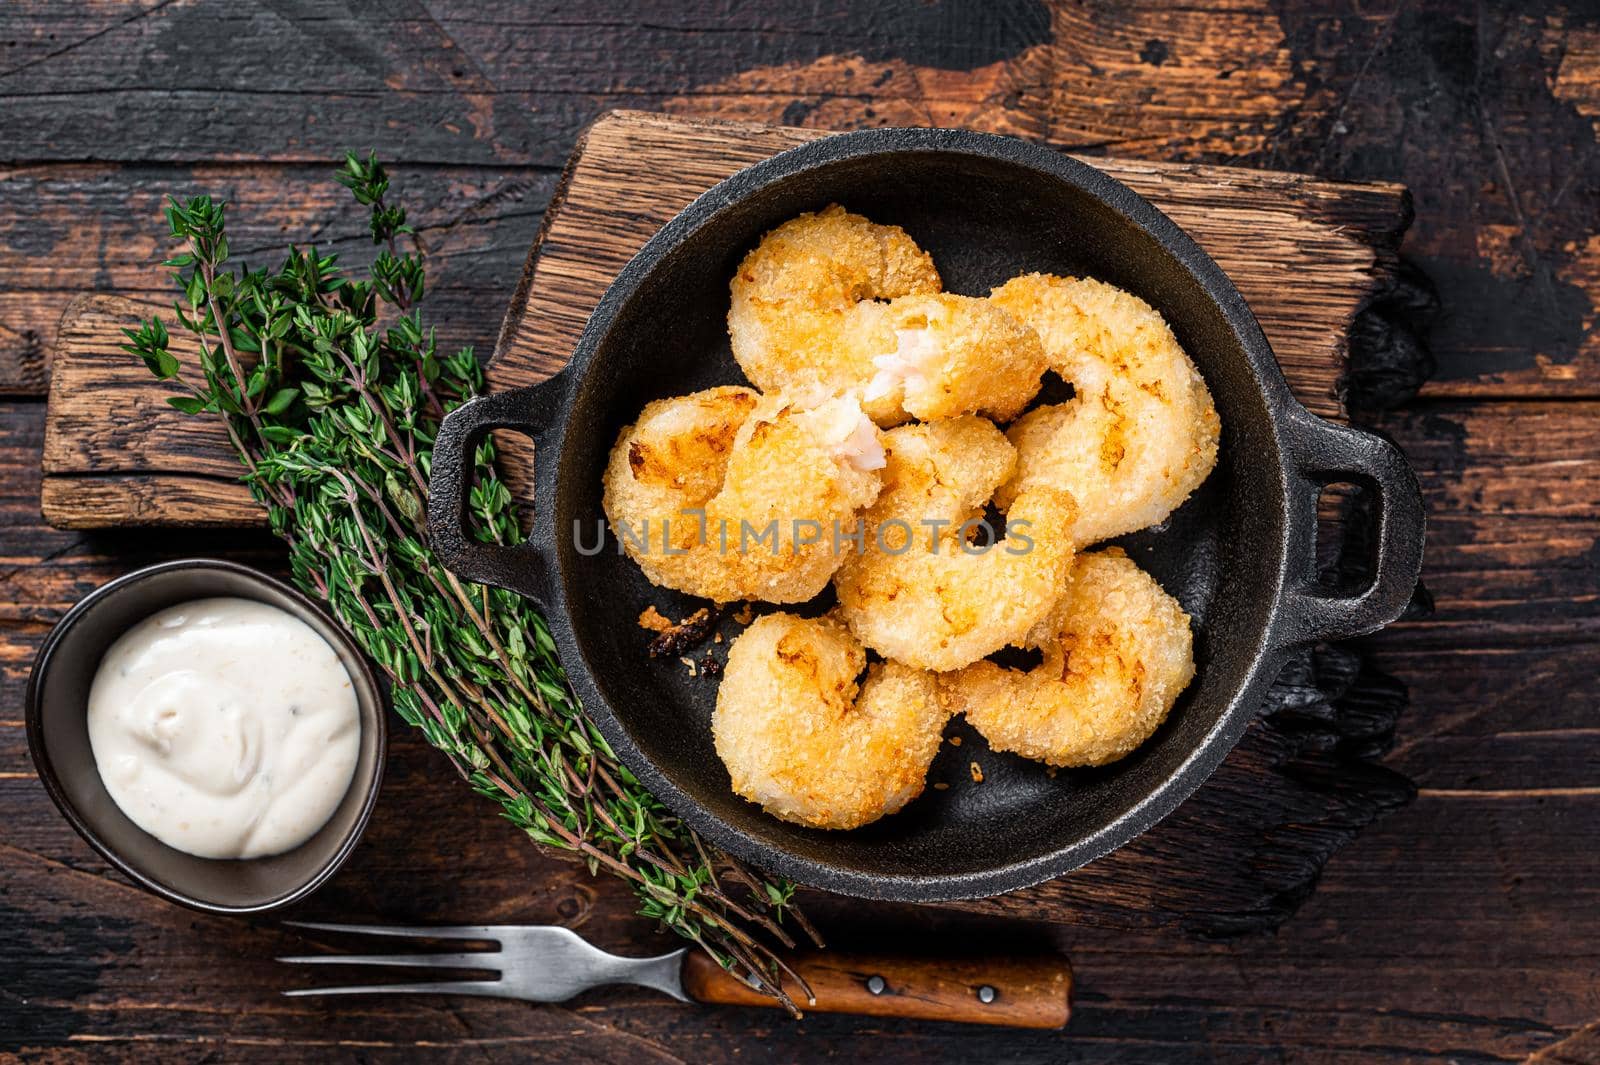 Fried Breaded Shrimps Prawns in a pan. Dark wooden background. Top view.